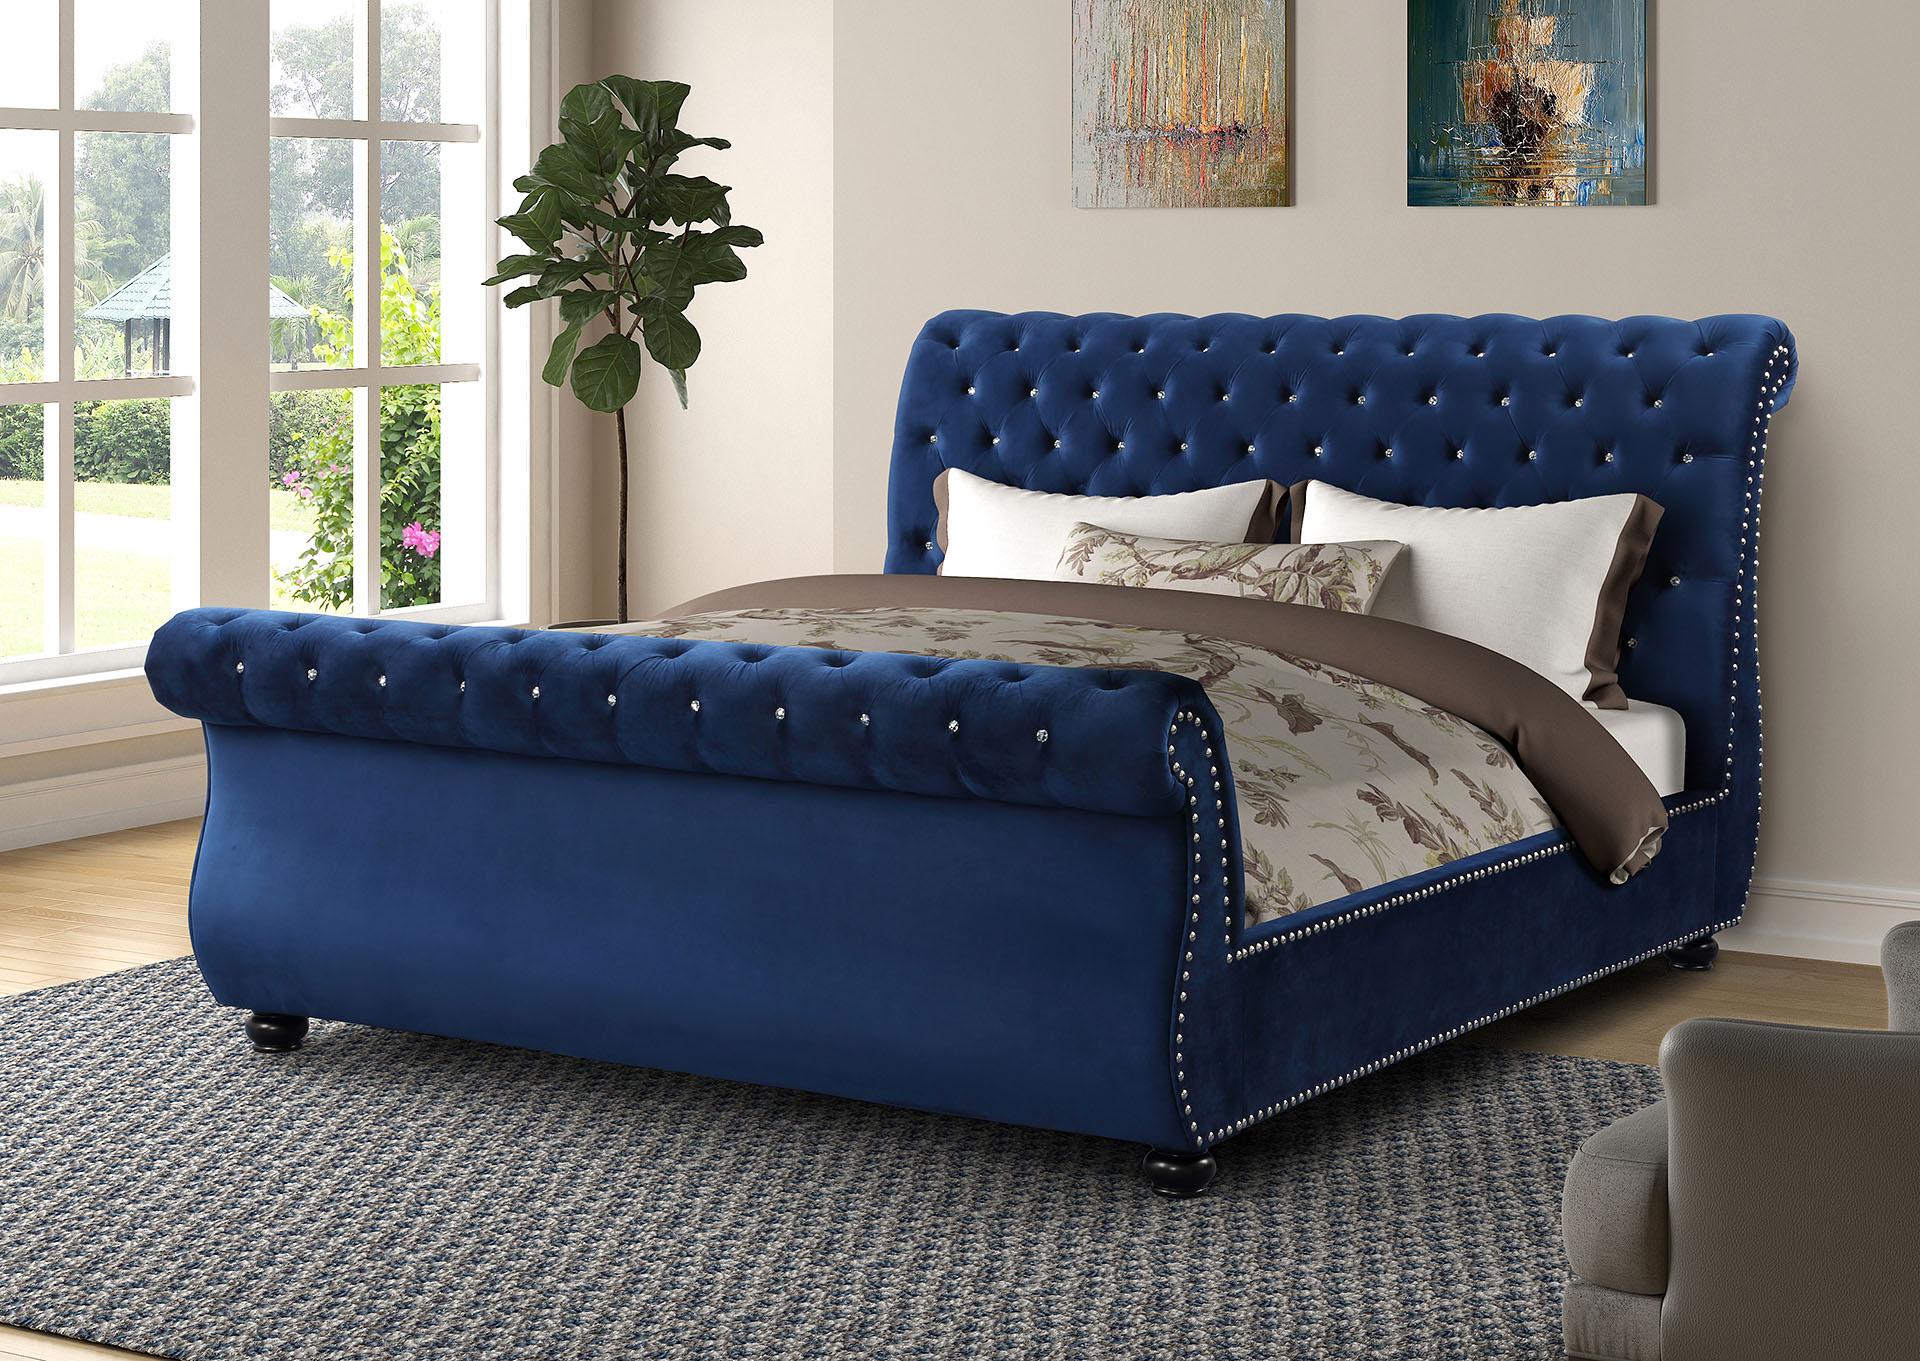 

    
Blue Velvet Crystal Tufted Queen Bed Set 5Pcs KENDALL Galaxy Home Contemporary
